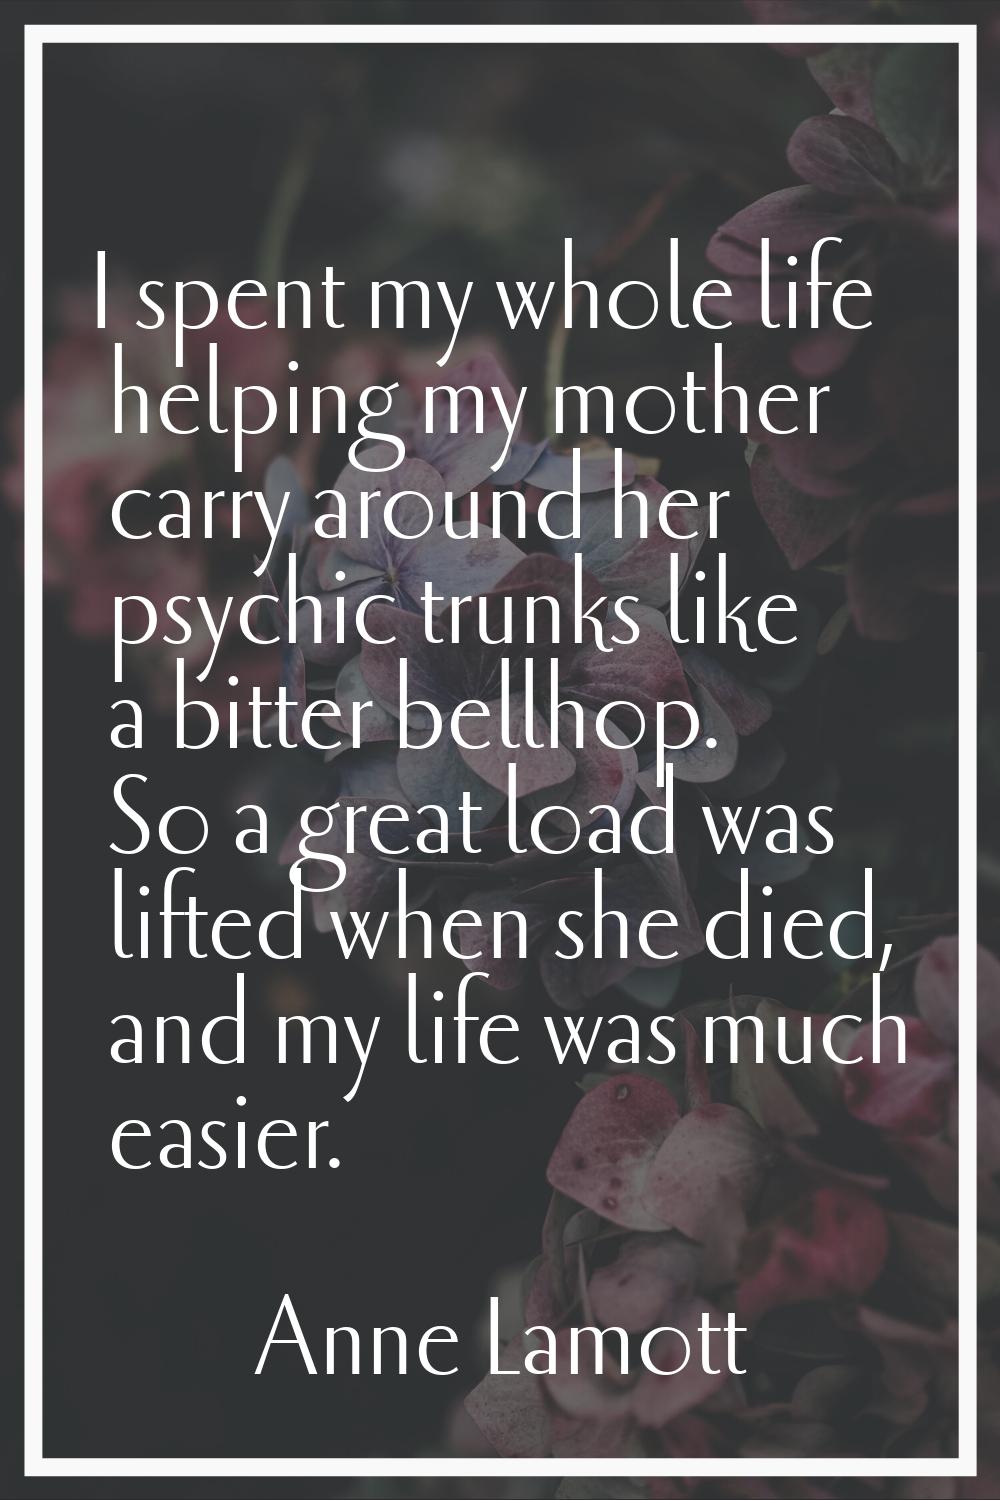 I spent my whole life helping my mother carry around her psychic trunks like a bitter bellhop. So a